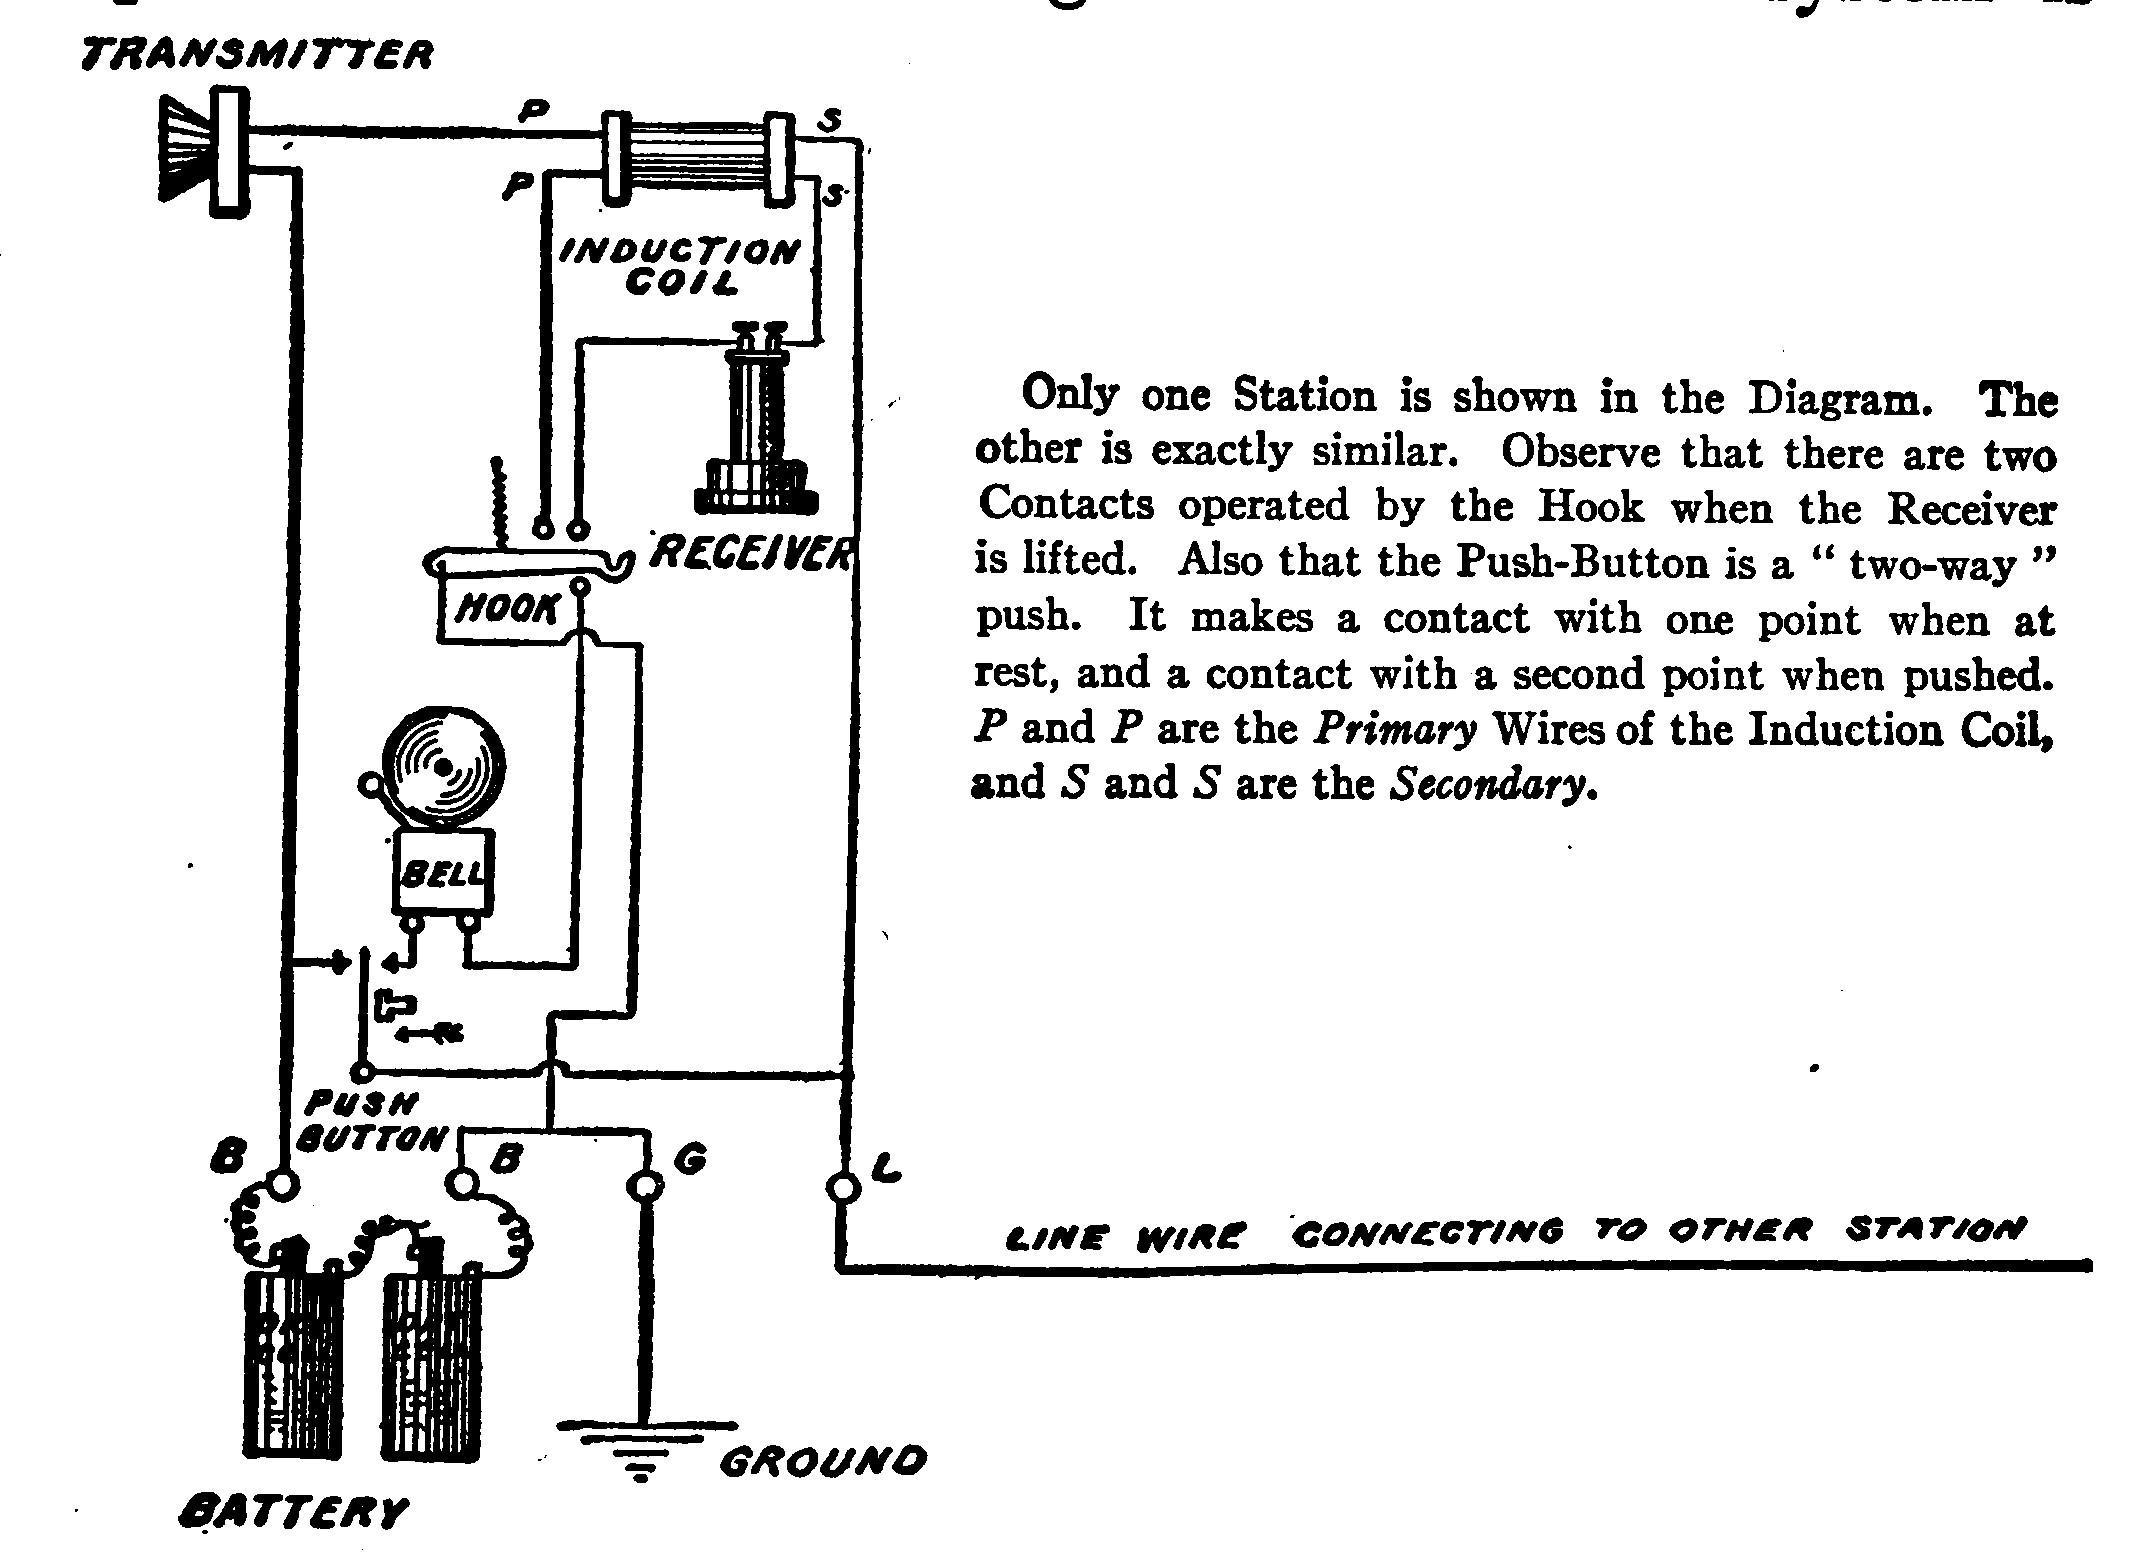 Fig. 153.—Diagram of Connection for a Telephone System employing an Induction Coil at each Station.